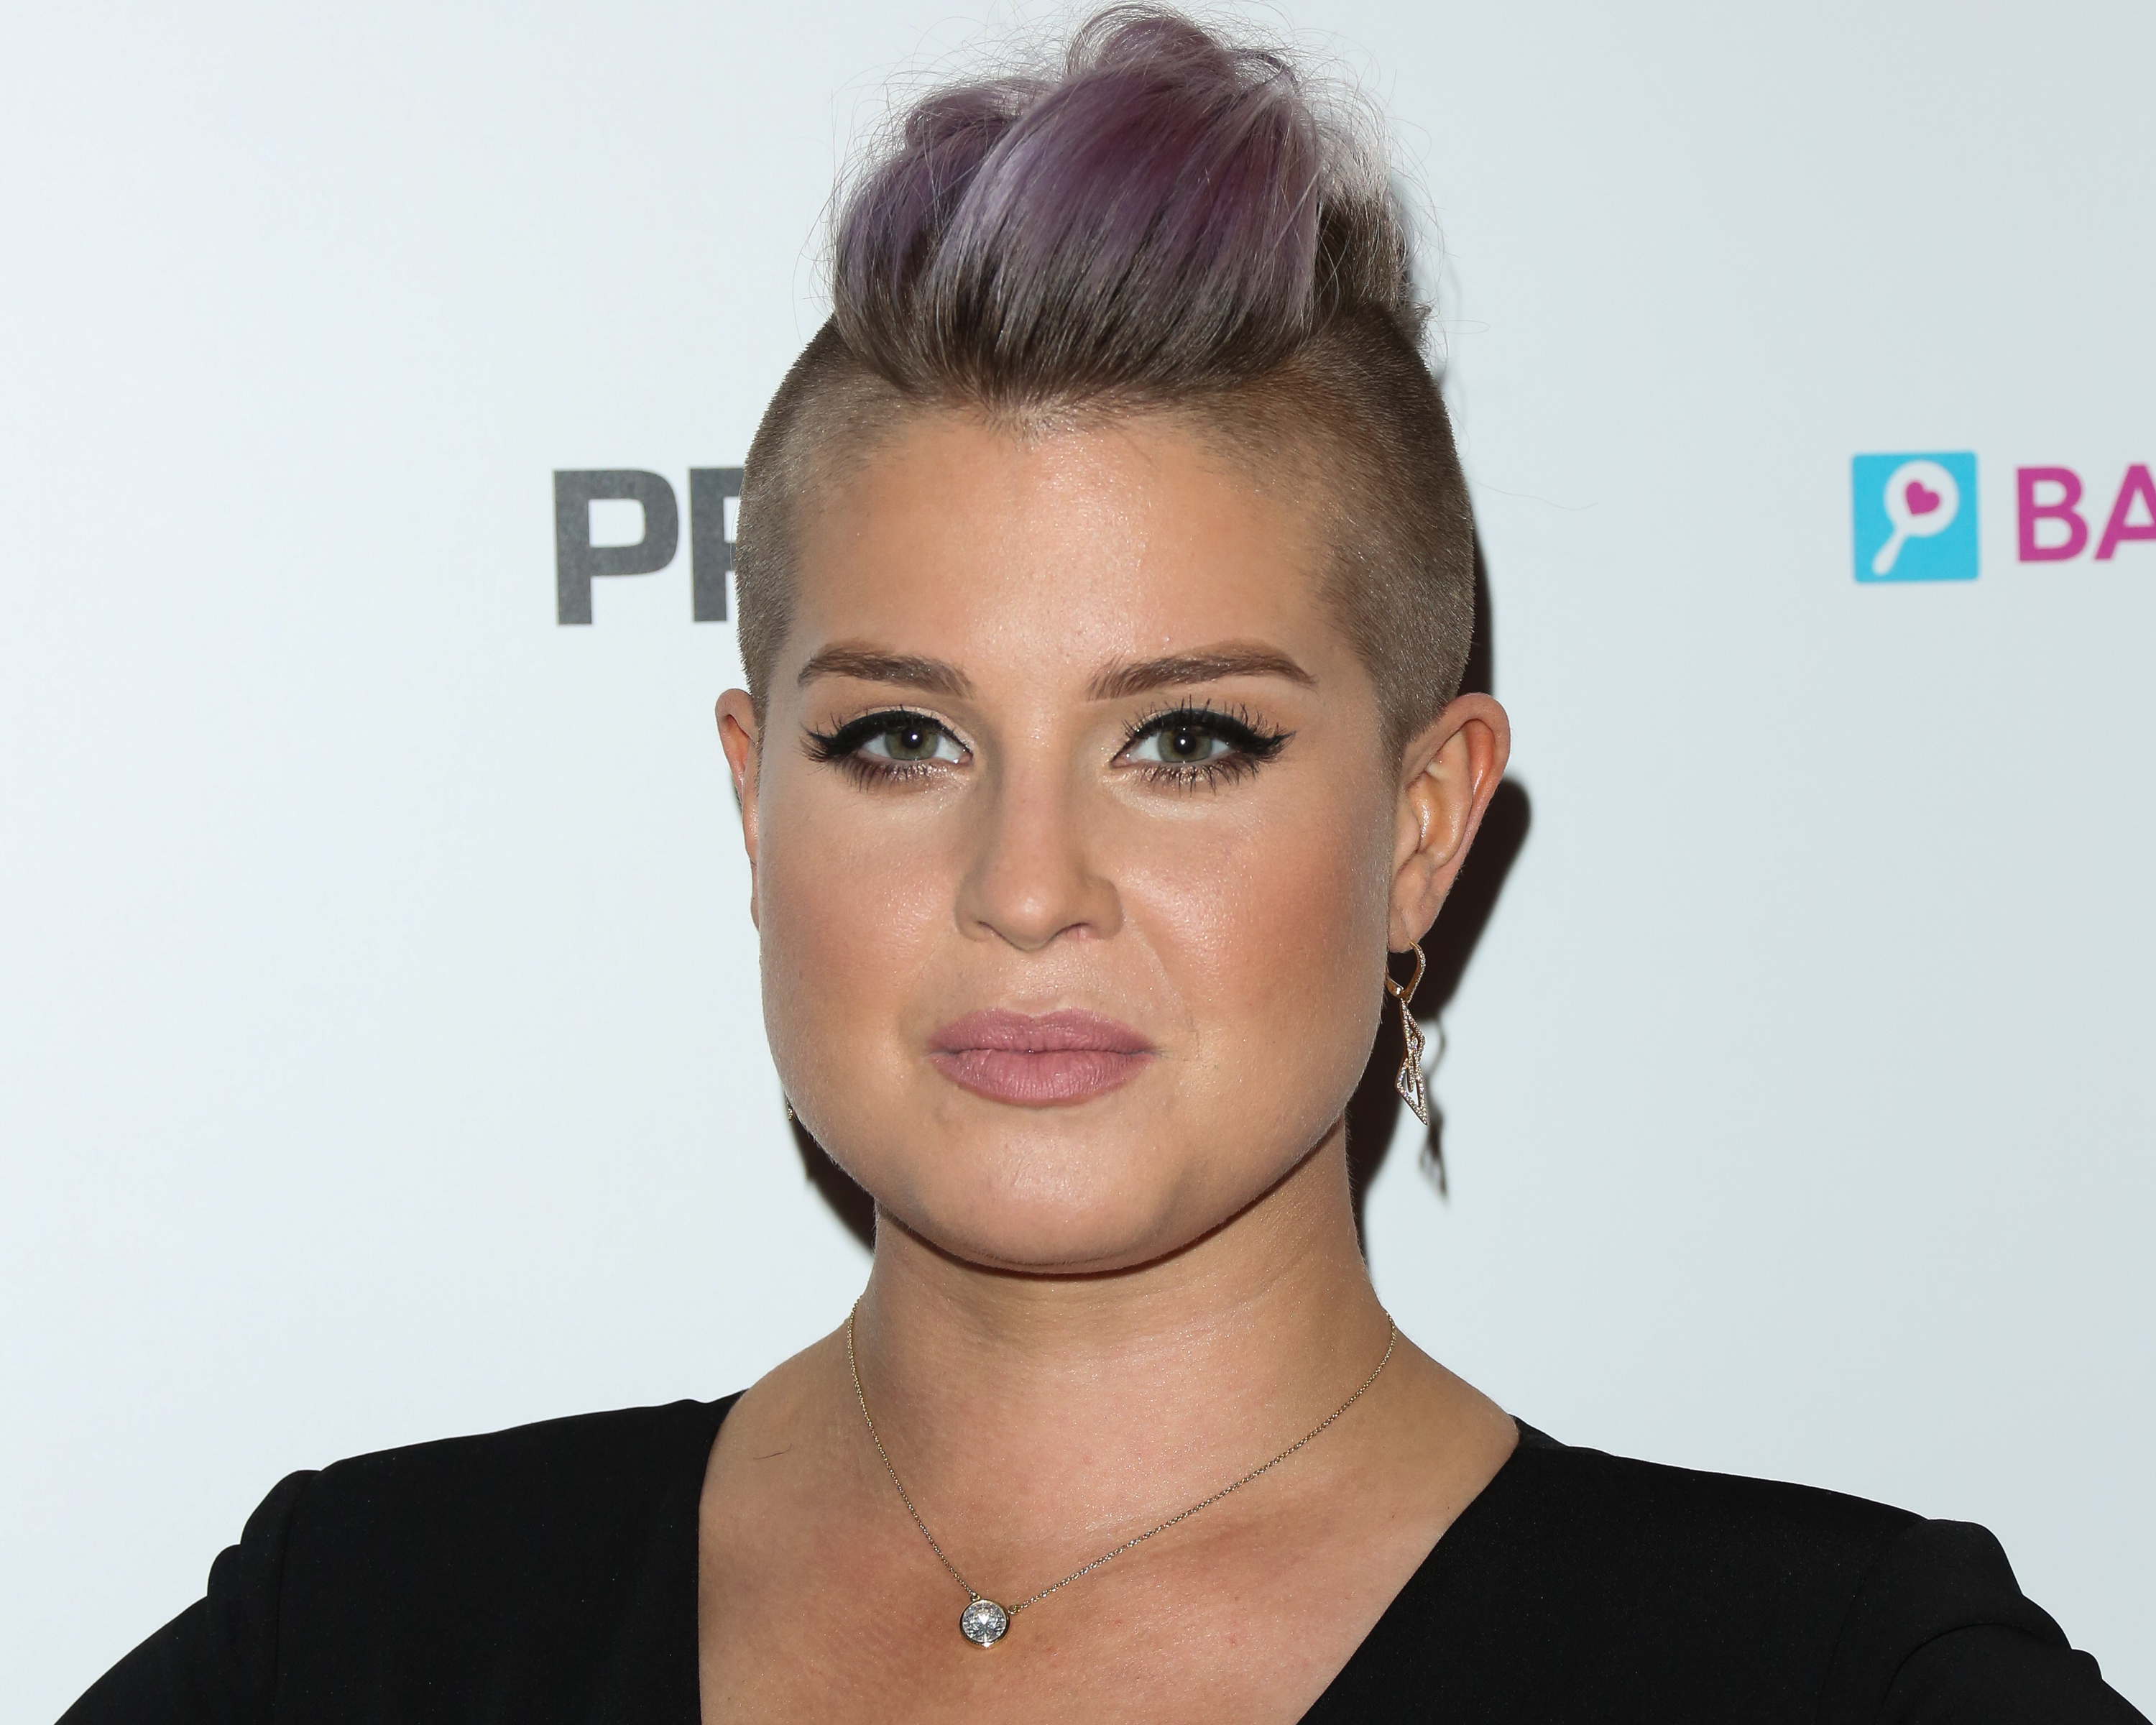 TV Personality Kelly Osbourne attends "The Babes For Boobs" charity event benefitting the Los Angeles county affiliate of the Susan G. Komen foundation on June 16, 2016 in Los Angeles. (Paul Archuleta—FilmMagic)